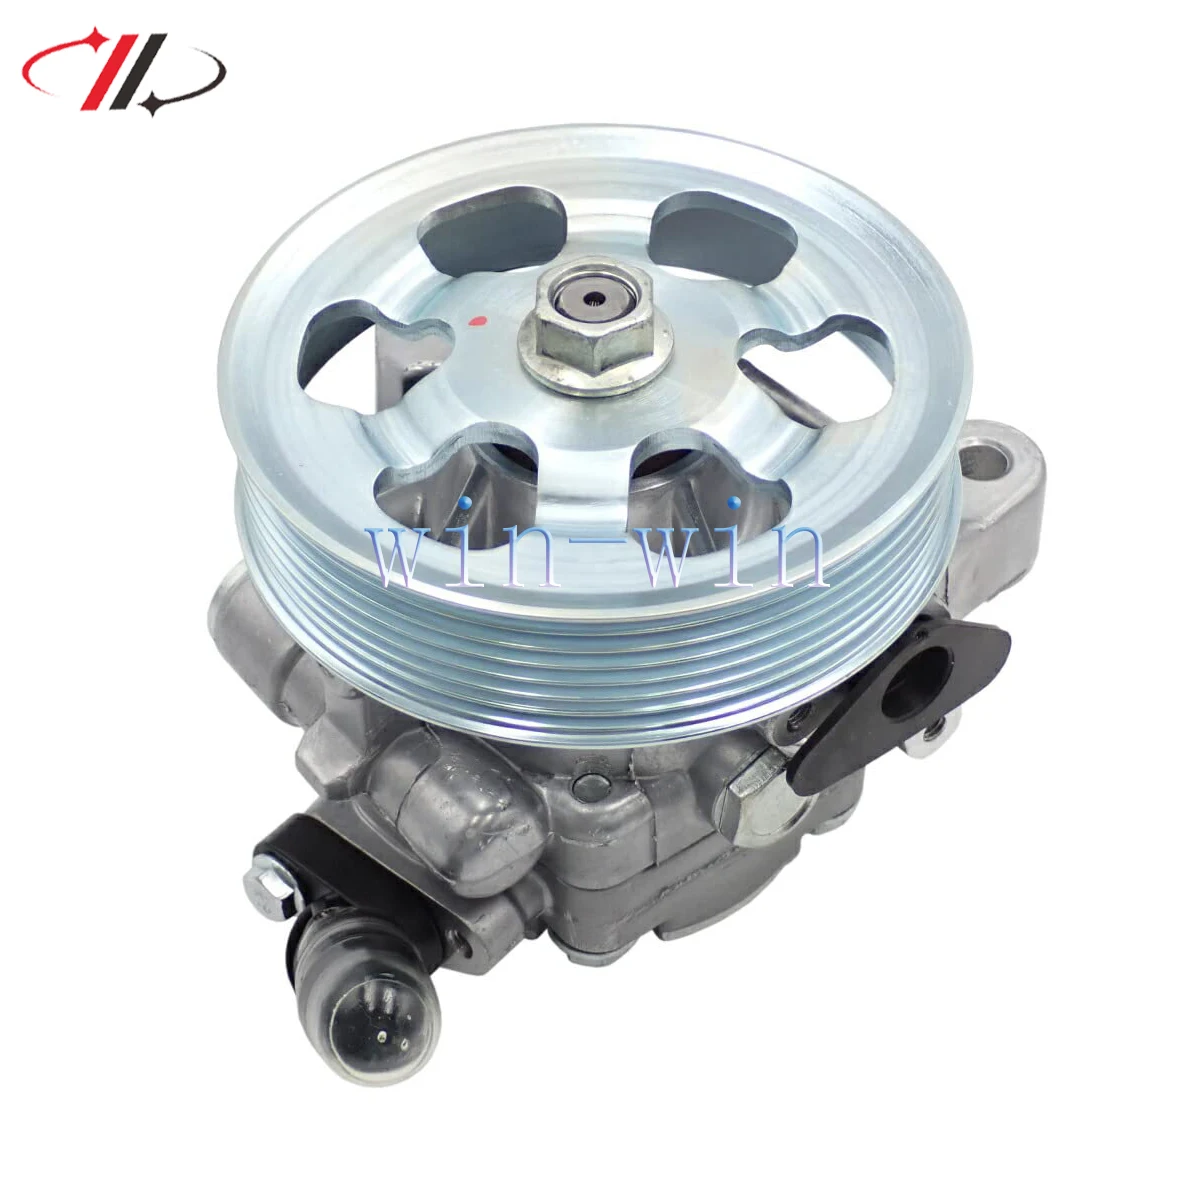 

56110-RTA-003 Power High-Quality Steering Pump Element For Honda CR-V 2007-2011 RE1 RE2 RE4 For ACCORD CM5 CM6 2006 2007